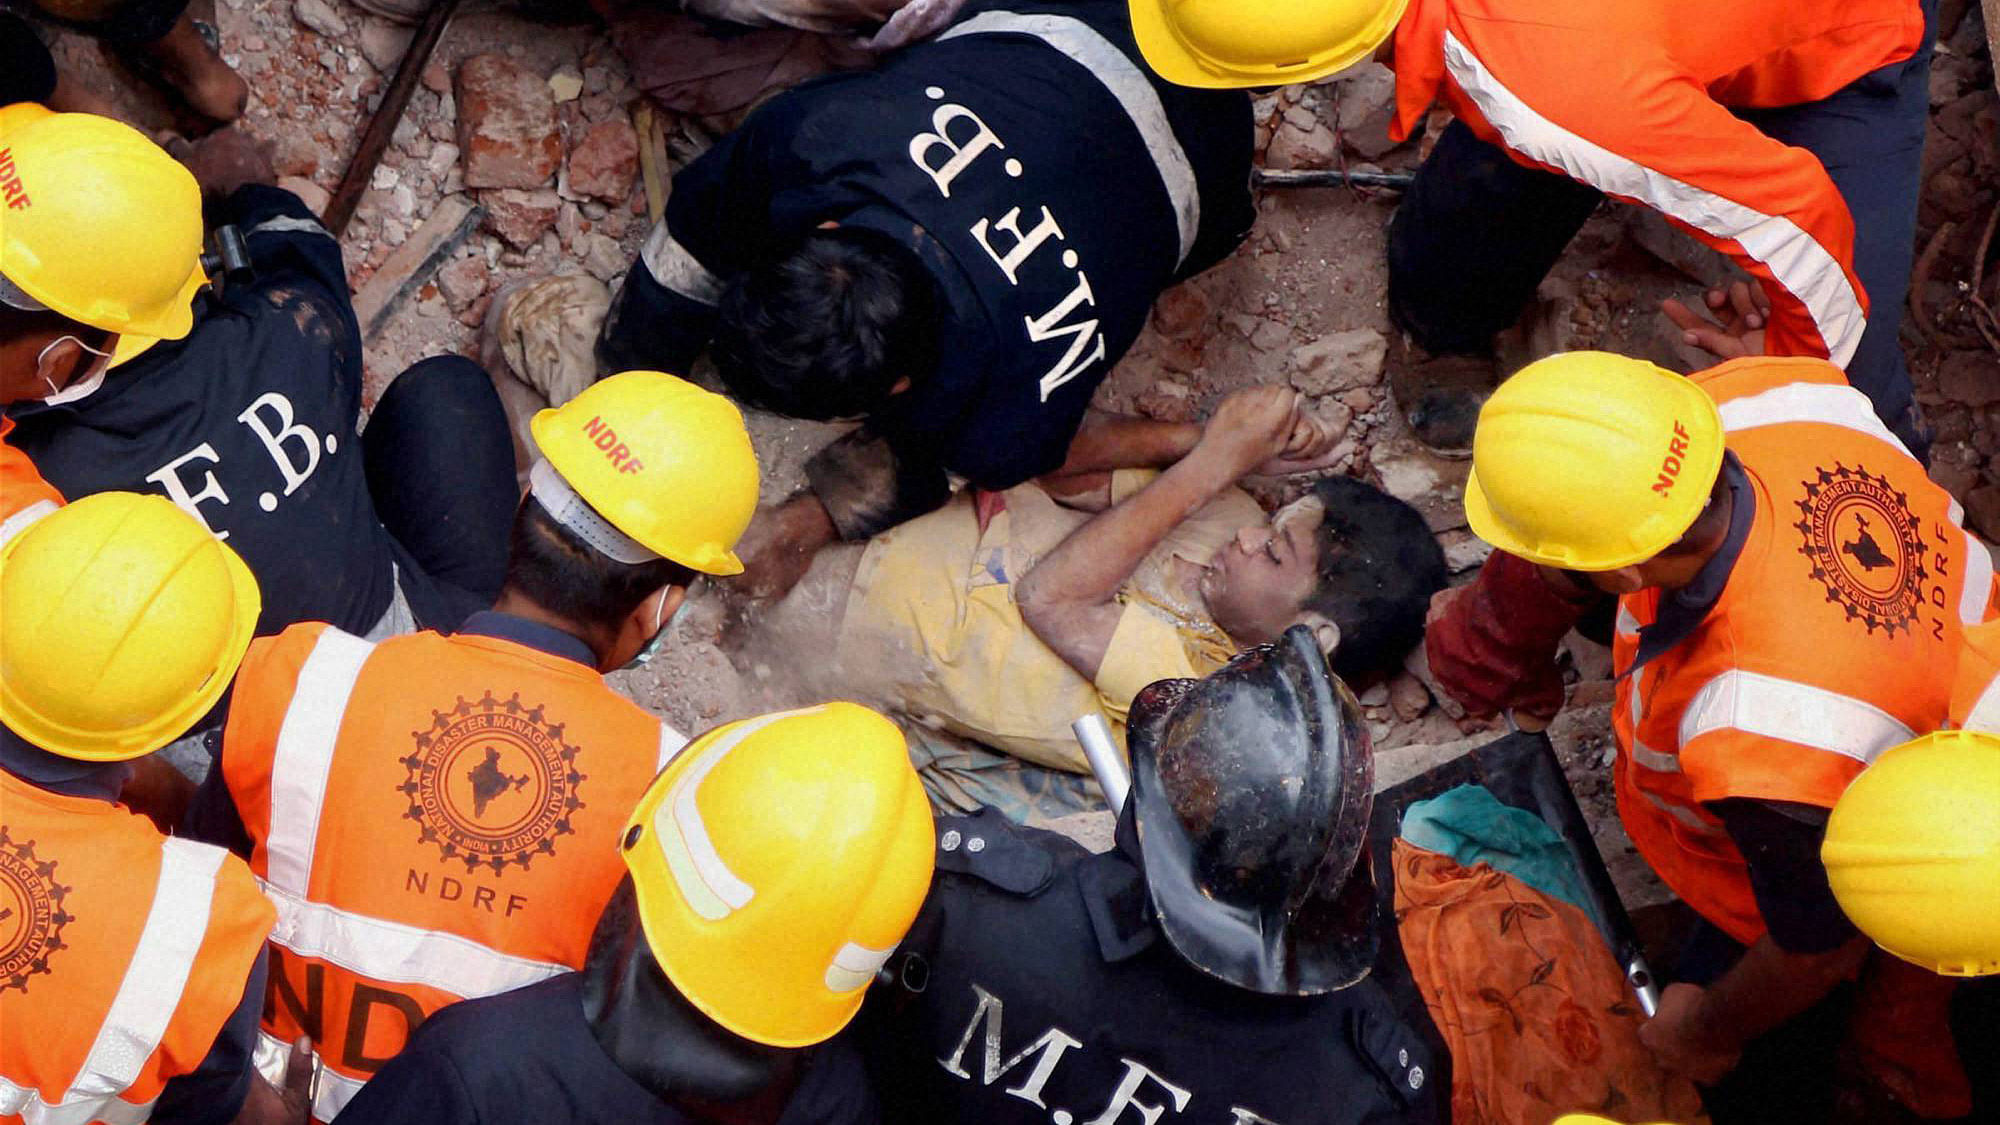 Rescue personnel save a person from the third&nbsp;floor of the collapsed building in Thane. (Photo: PTI)